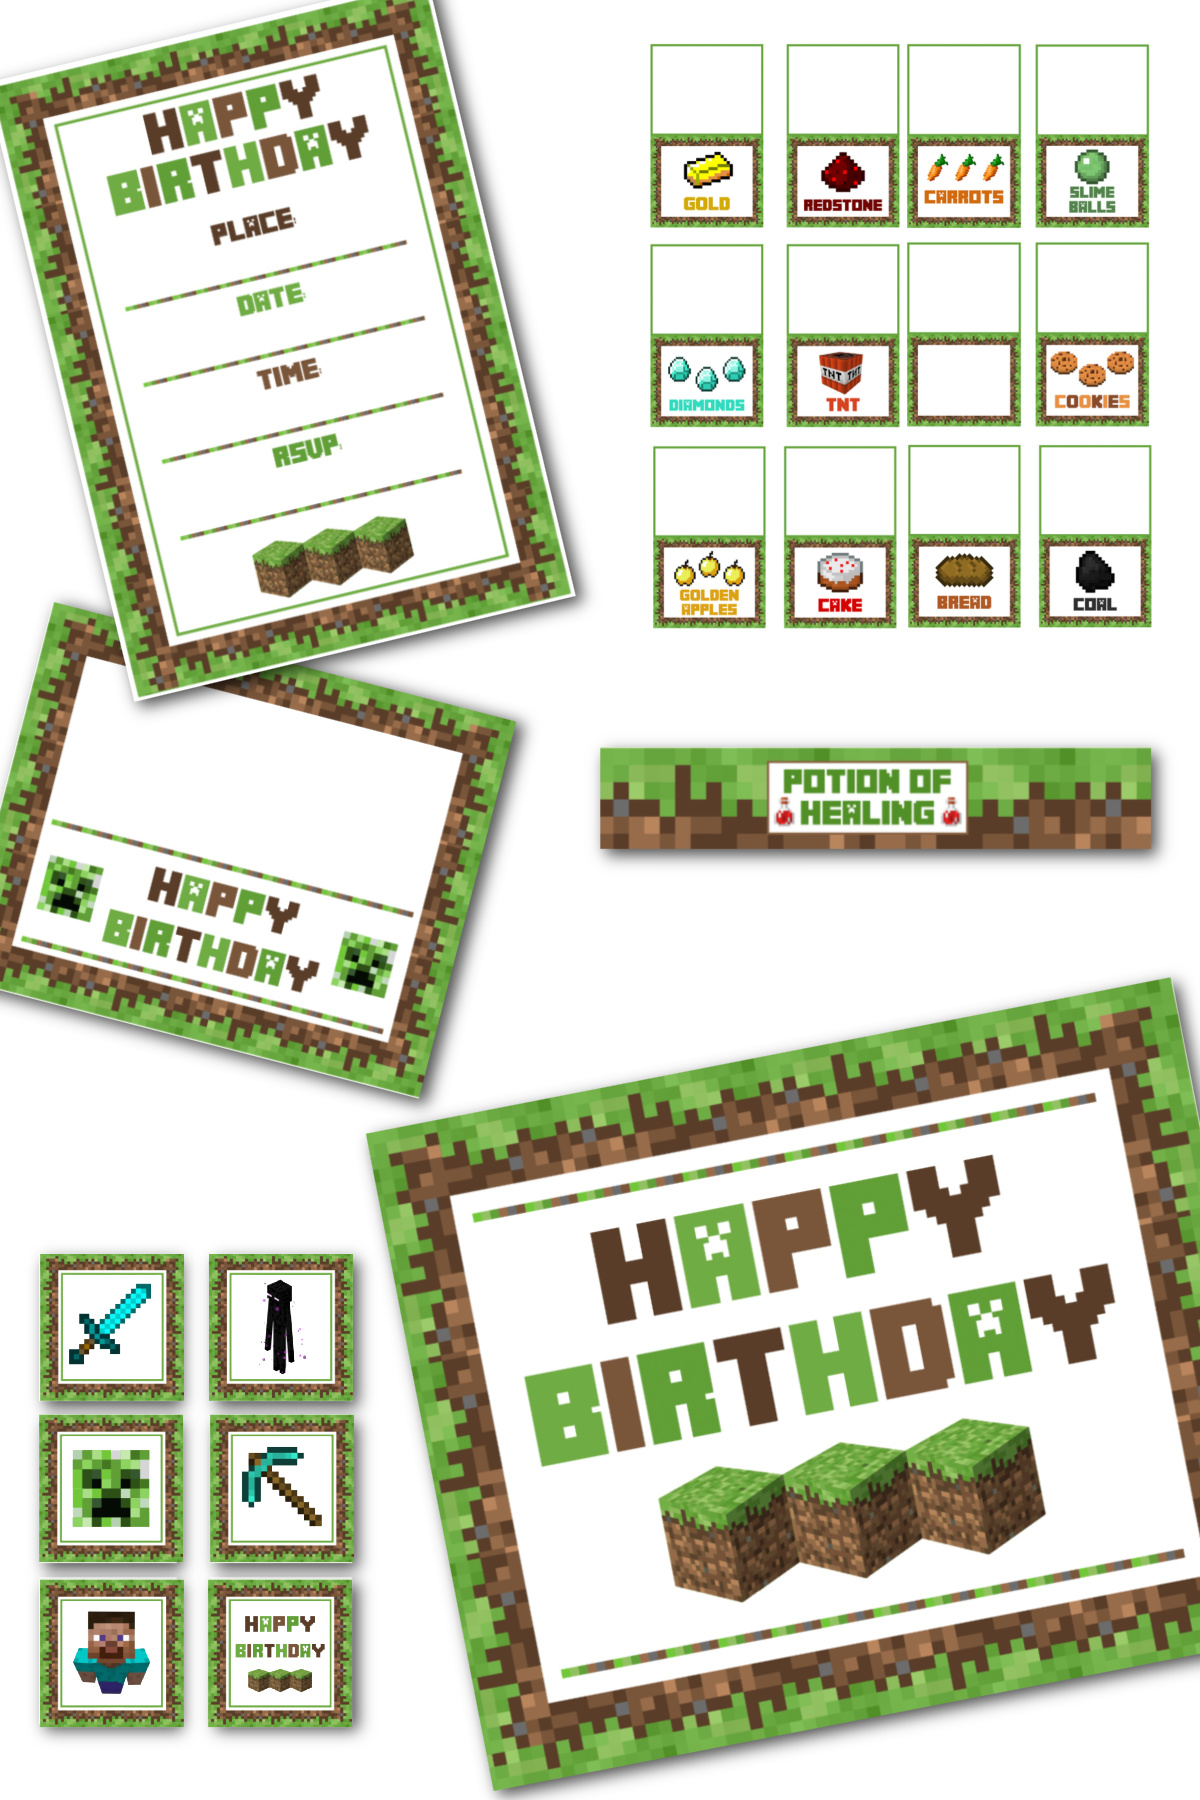 Download These Awesome FREE Minecraft Party Printables!